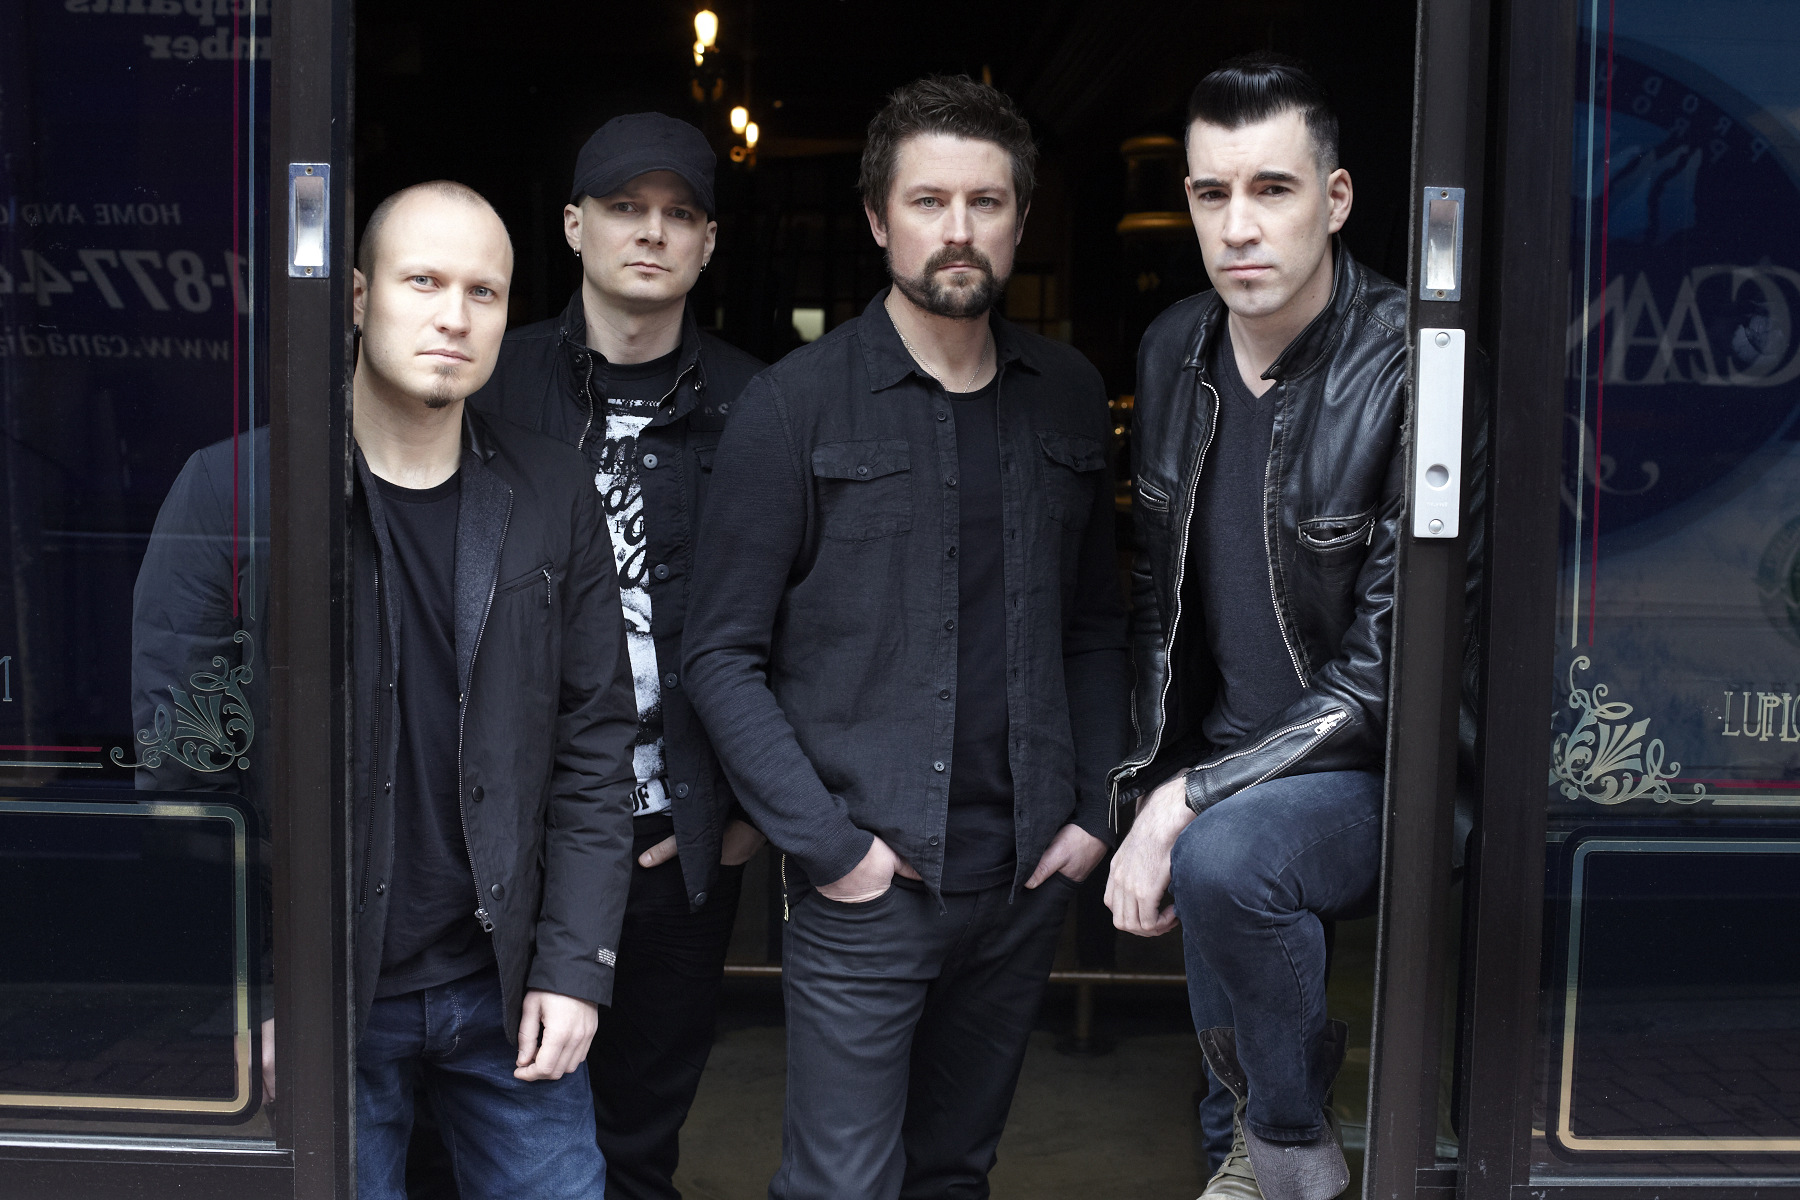 CUTTING EDGE – Canadian band Theory of a Deadman to play Red Deer’s Memorial Centre this weekend.